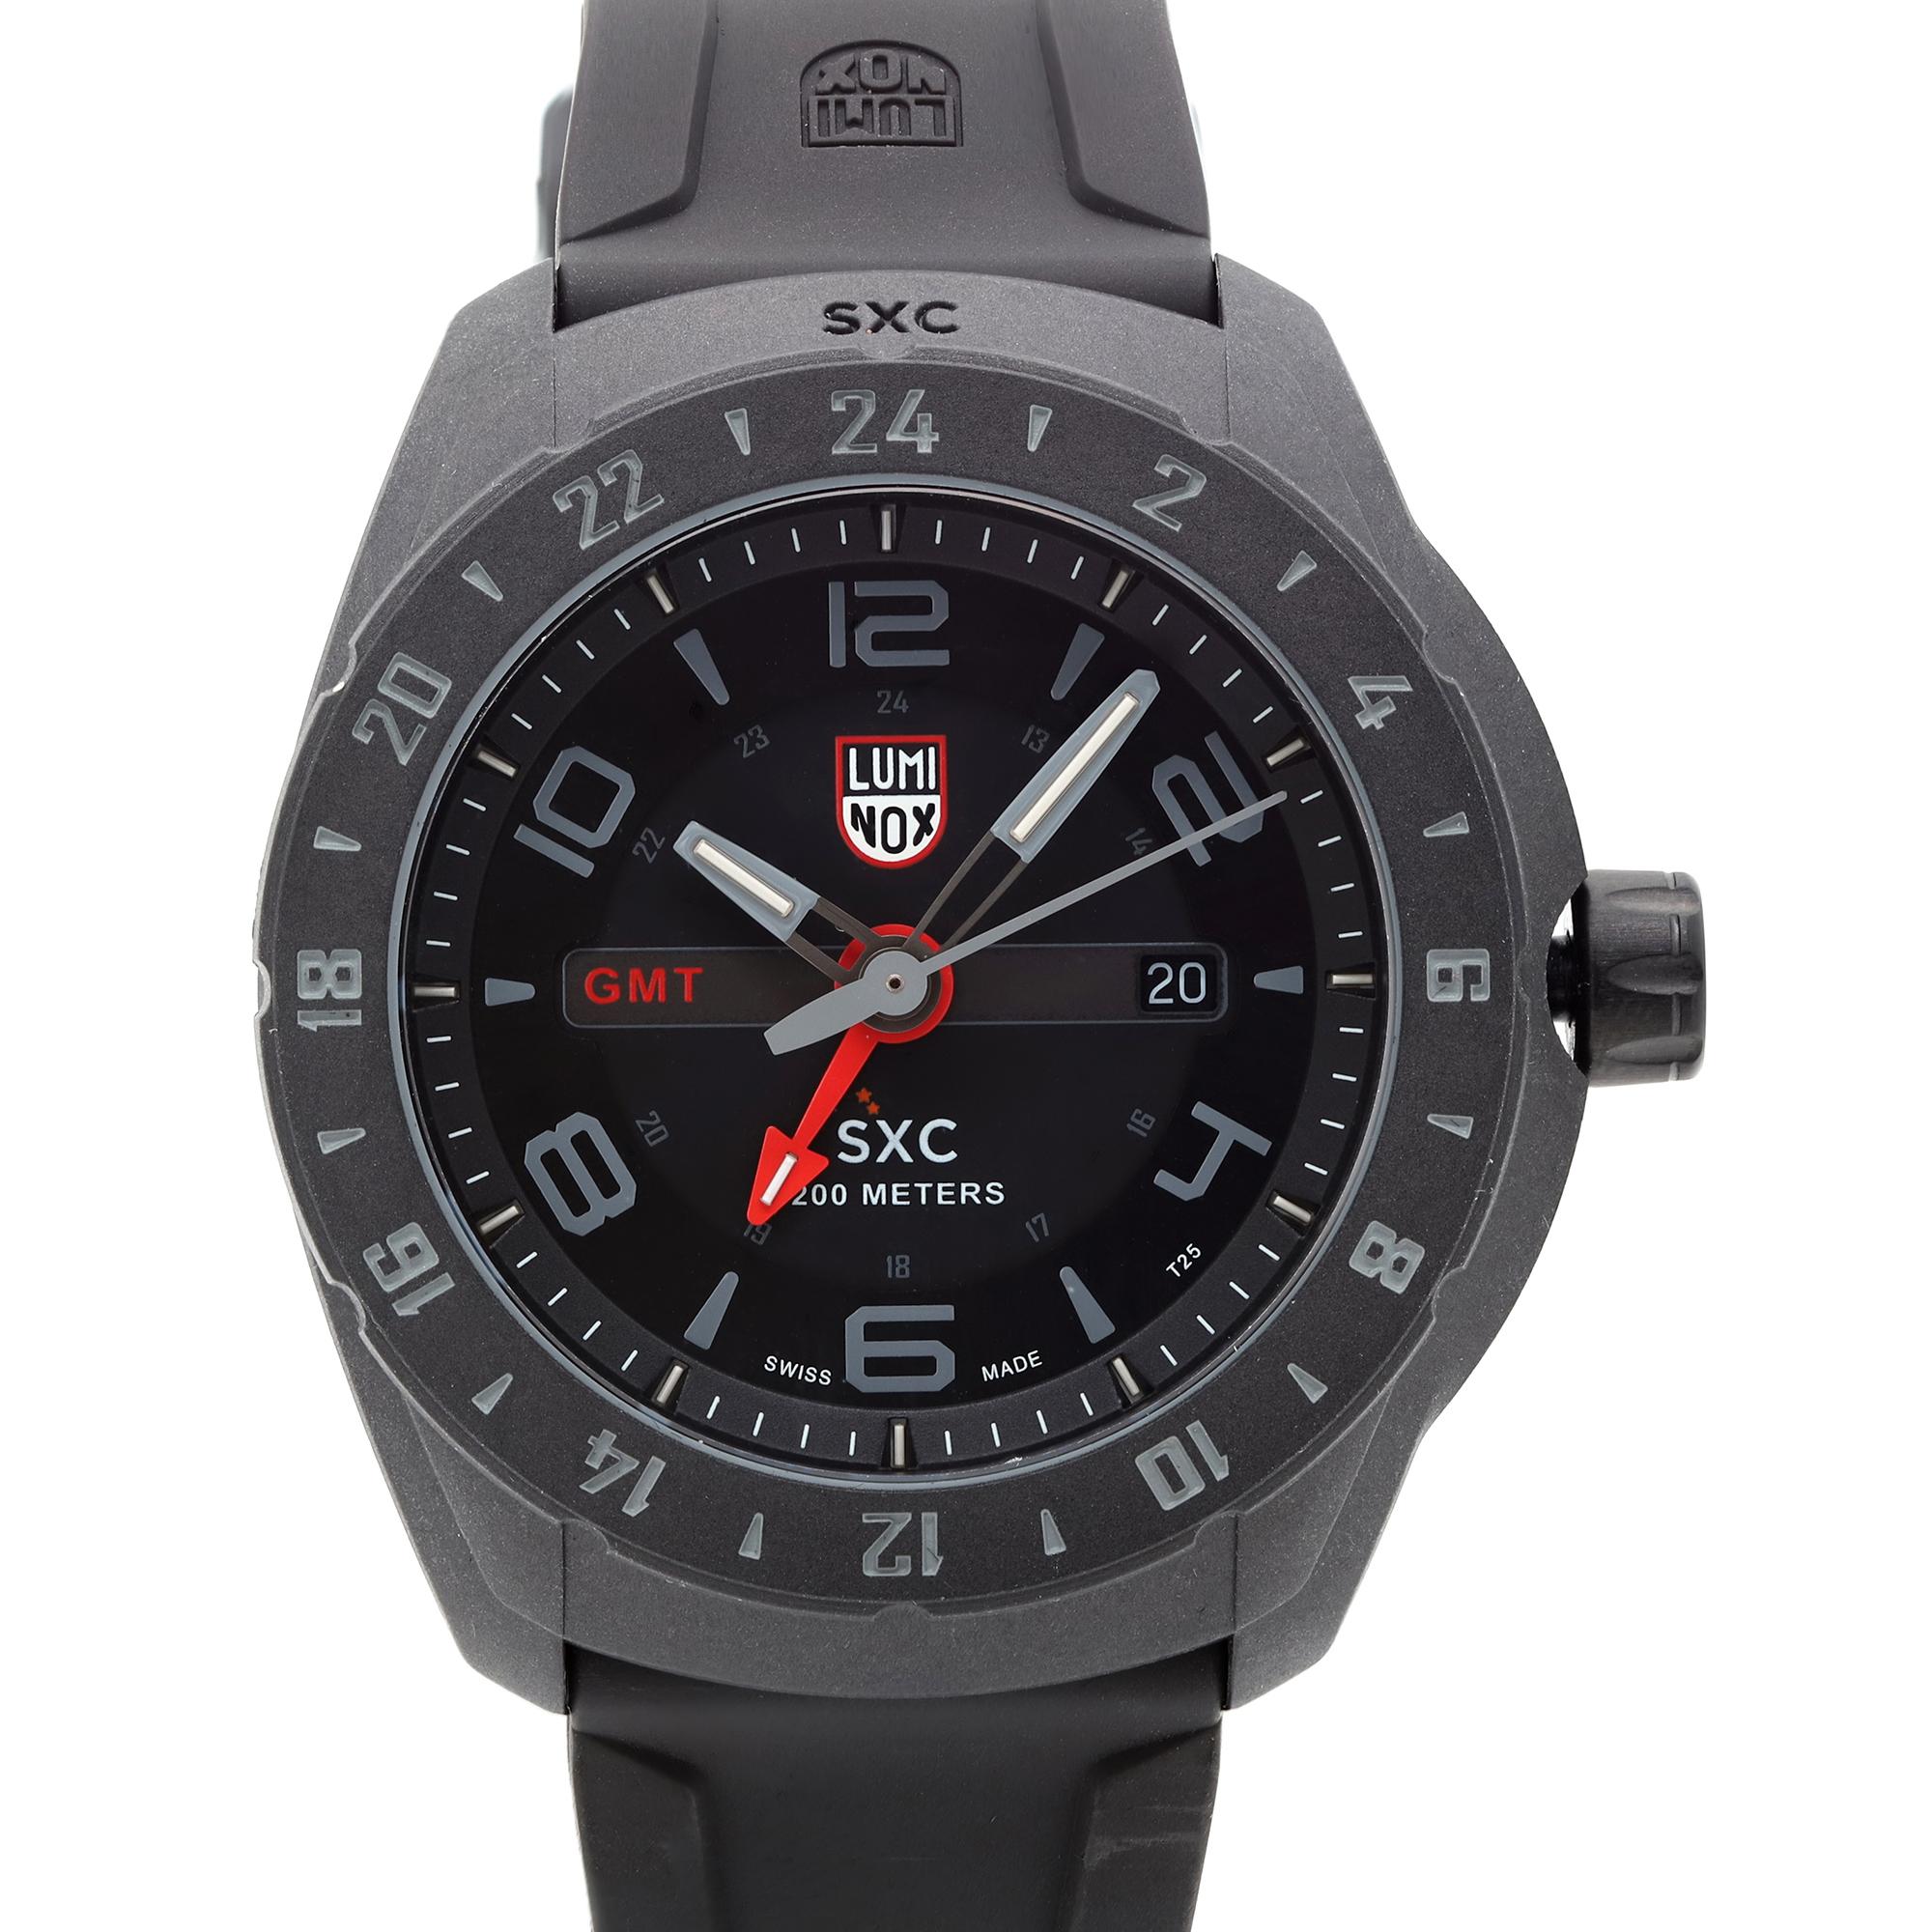 Display model. This Luminox SXC Space men's watch has never been worn or used. may have micro marks on the case and bezel due to store handling. Covered by a 1-year warranty.

Brand: Luminox  Type: Wristwatch  Department: Men  Model Number: